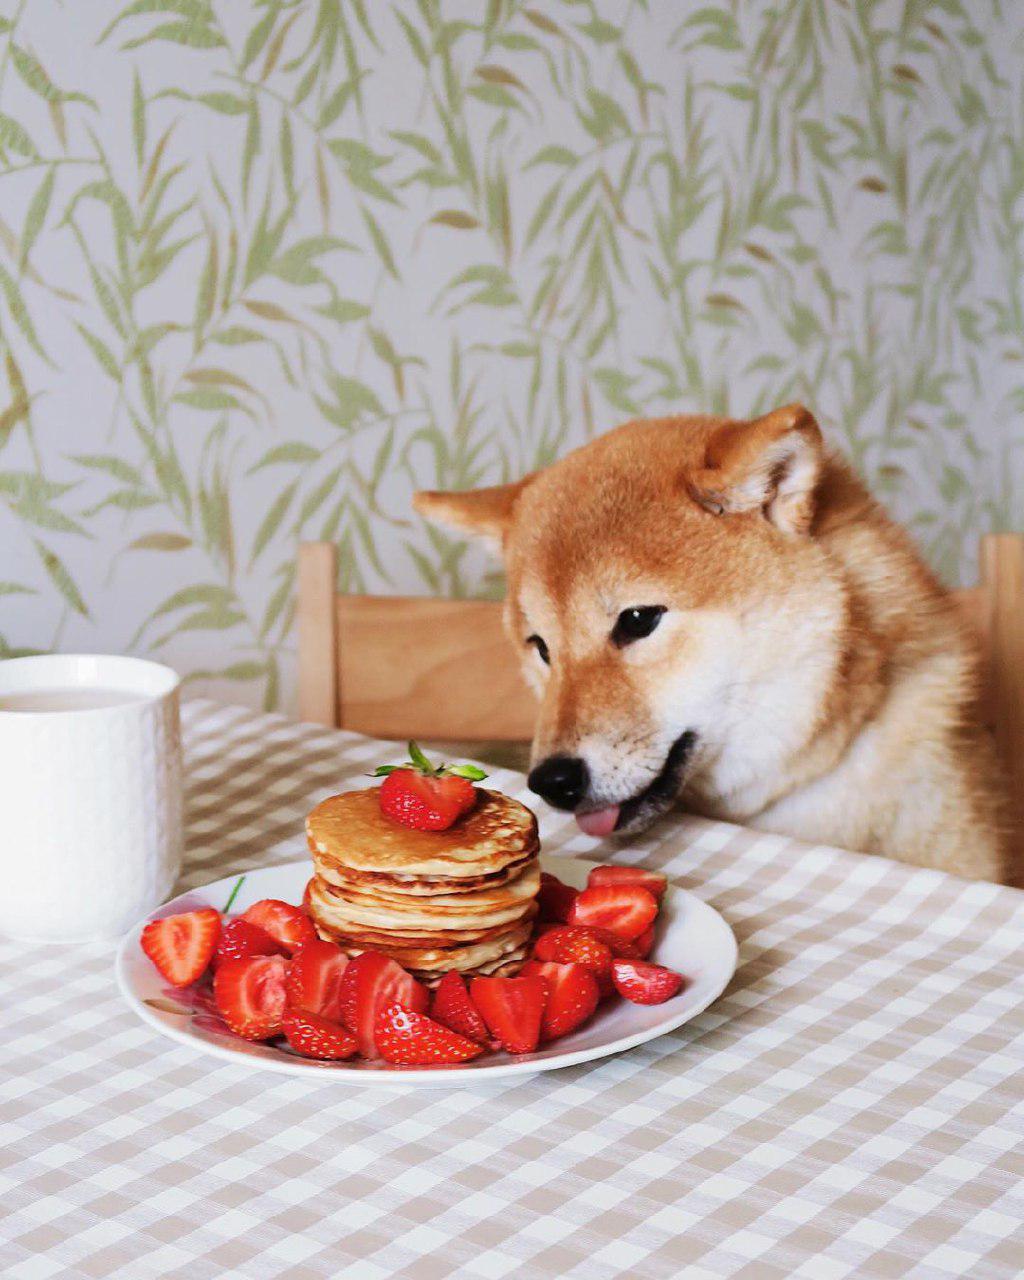 A Shiba Inu sitting at the table while trying to lick the strawberry pancake in front of him